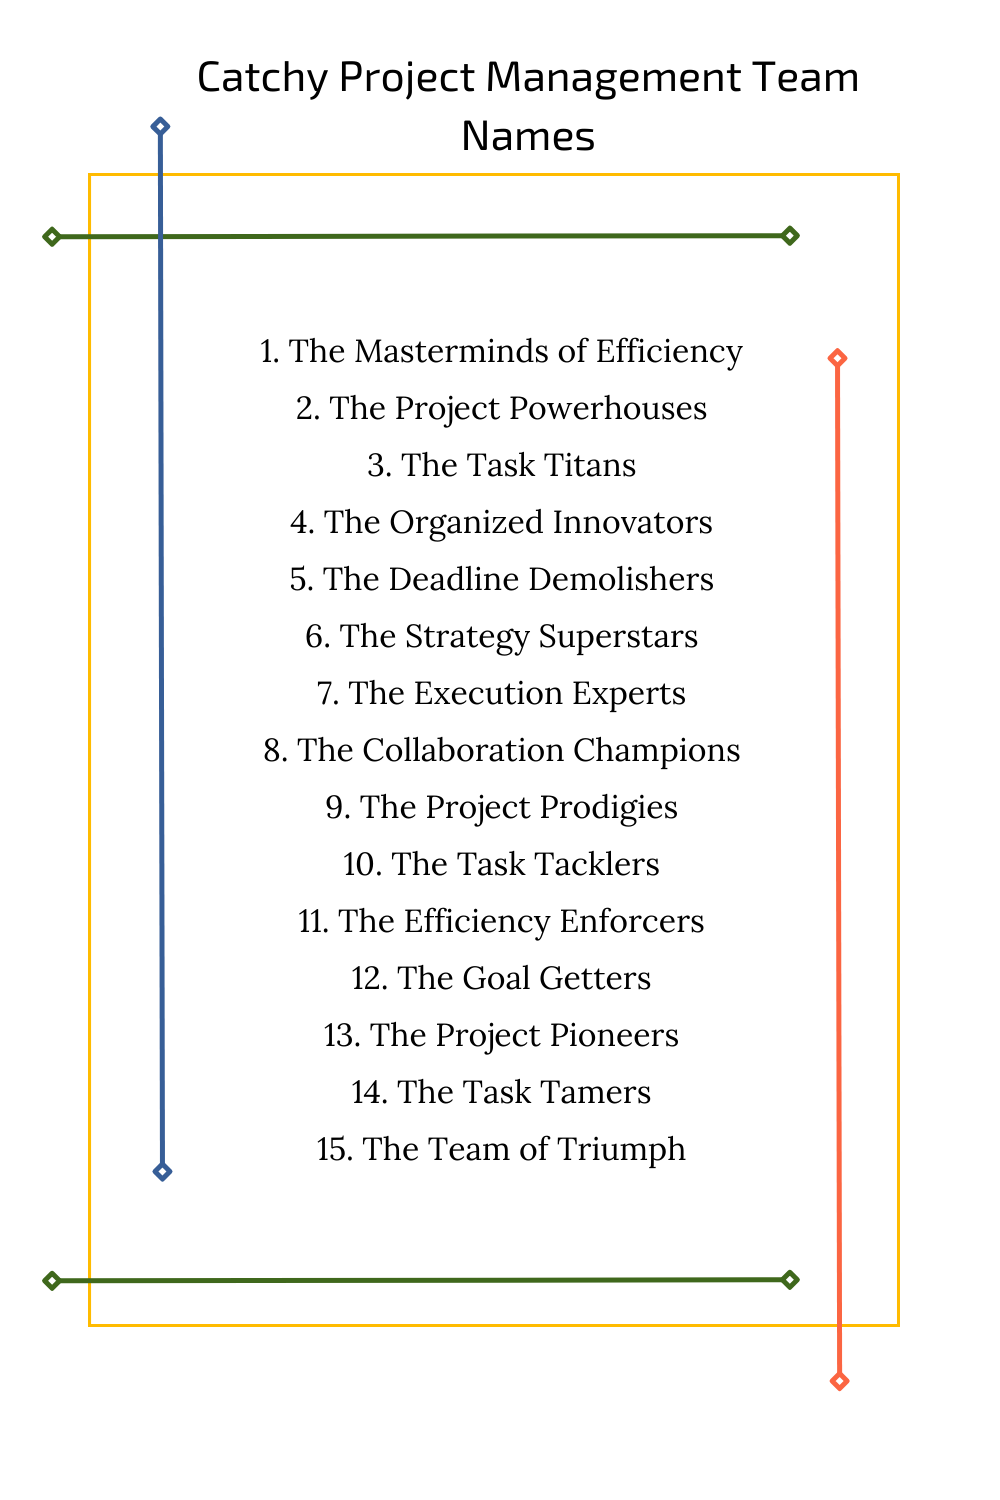 Catchy Project Management Team Names